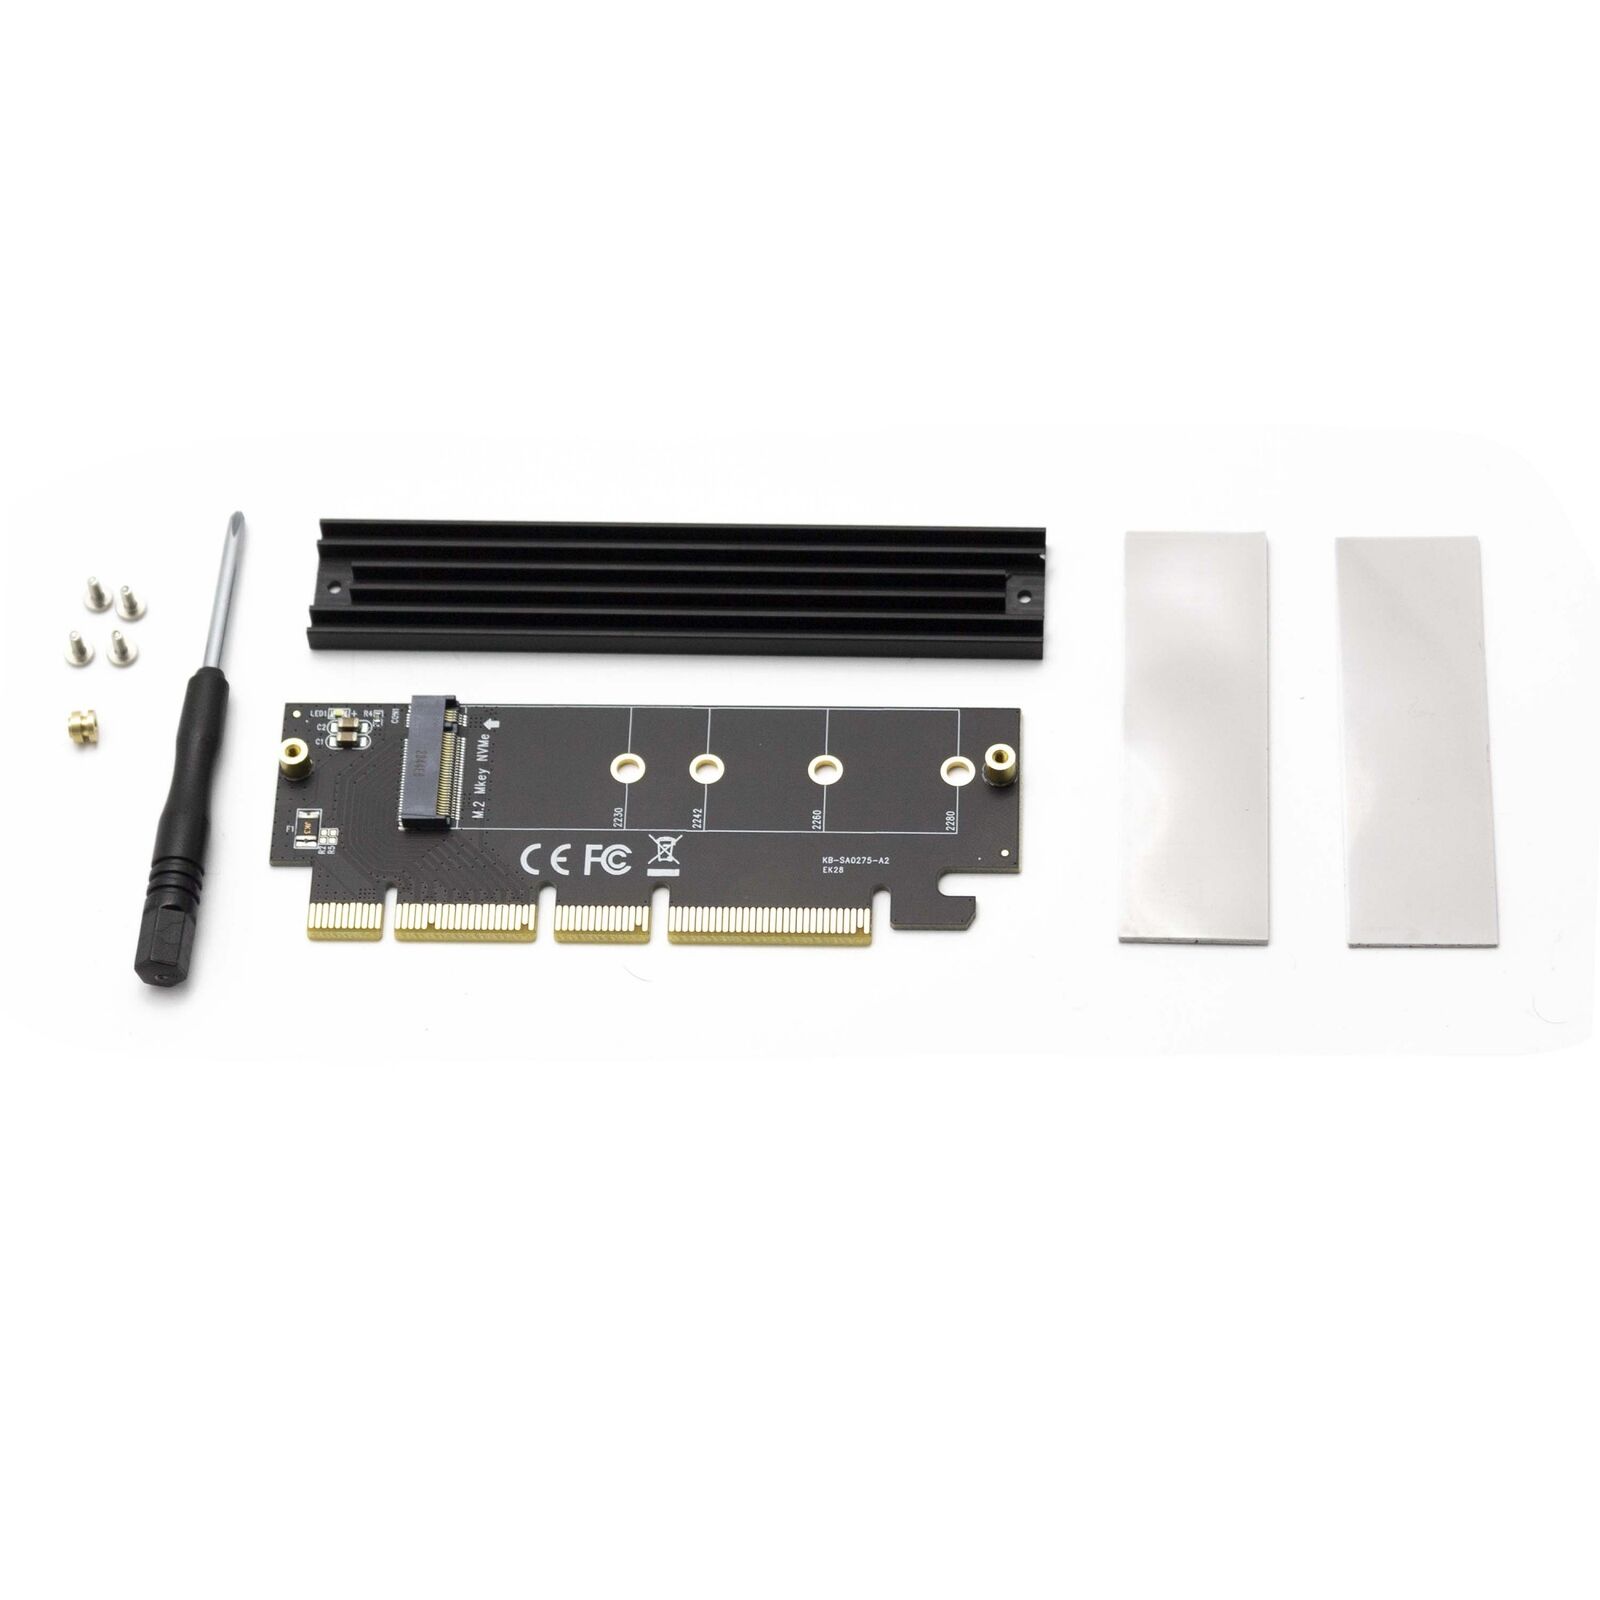 Adapter Converter Containing Pcie X4 X8 X16 4.0 Gen4 A SSD M.2 Nvme With 240gb_